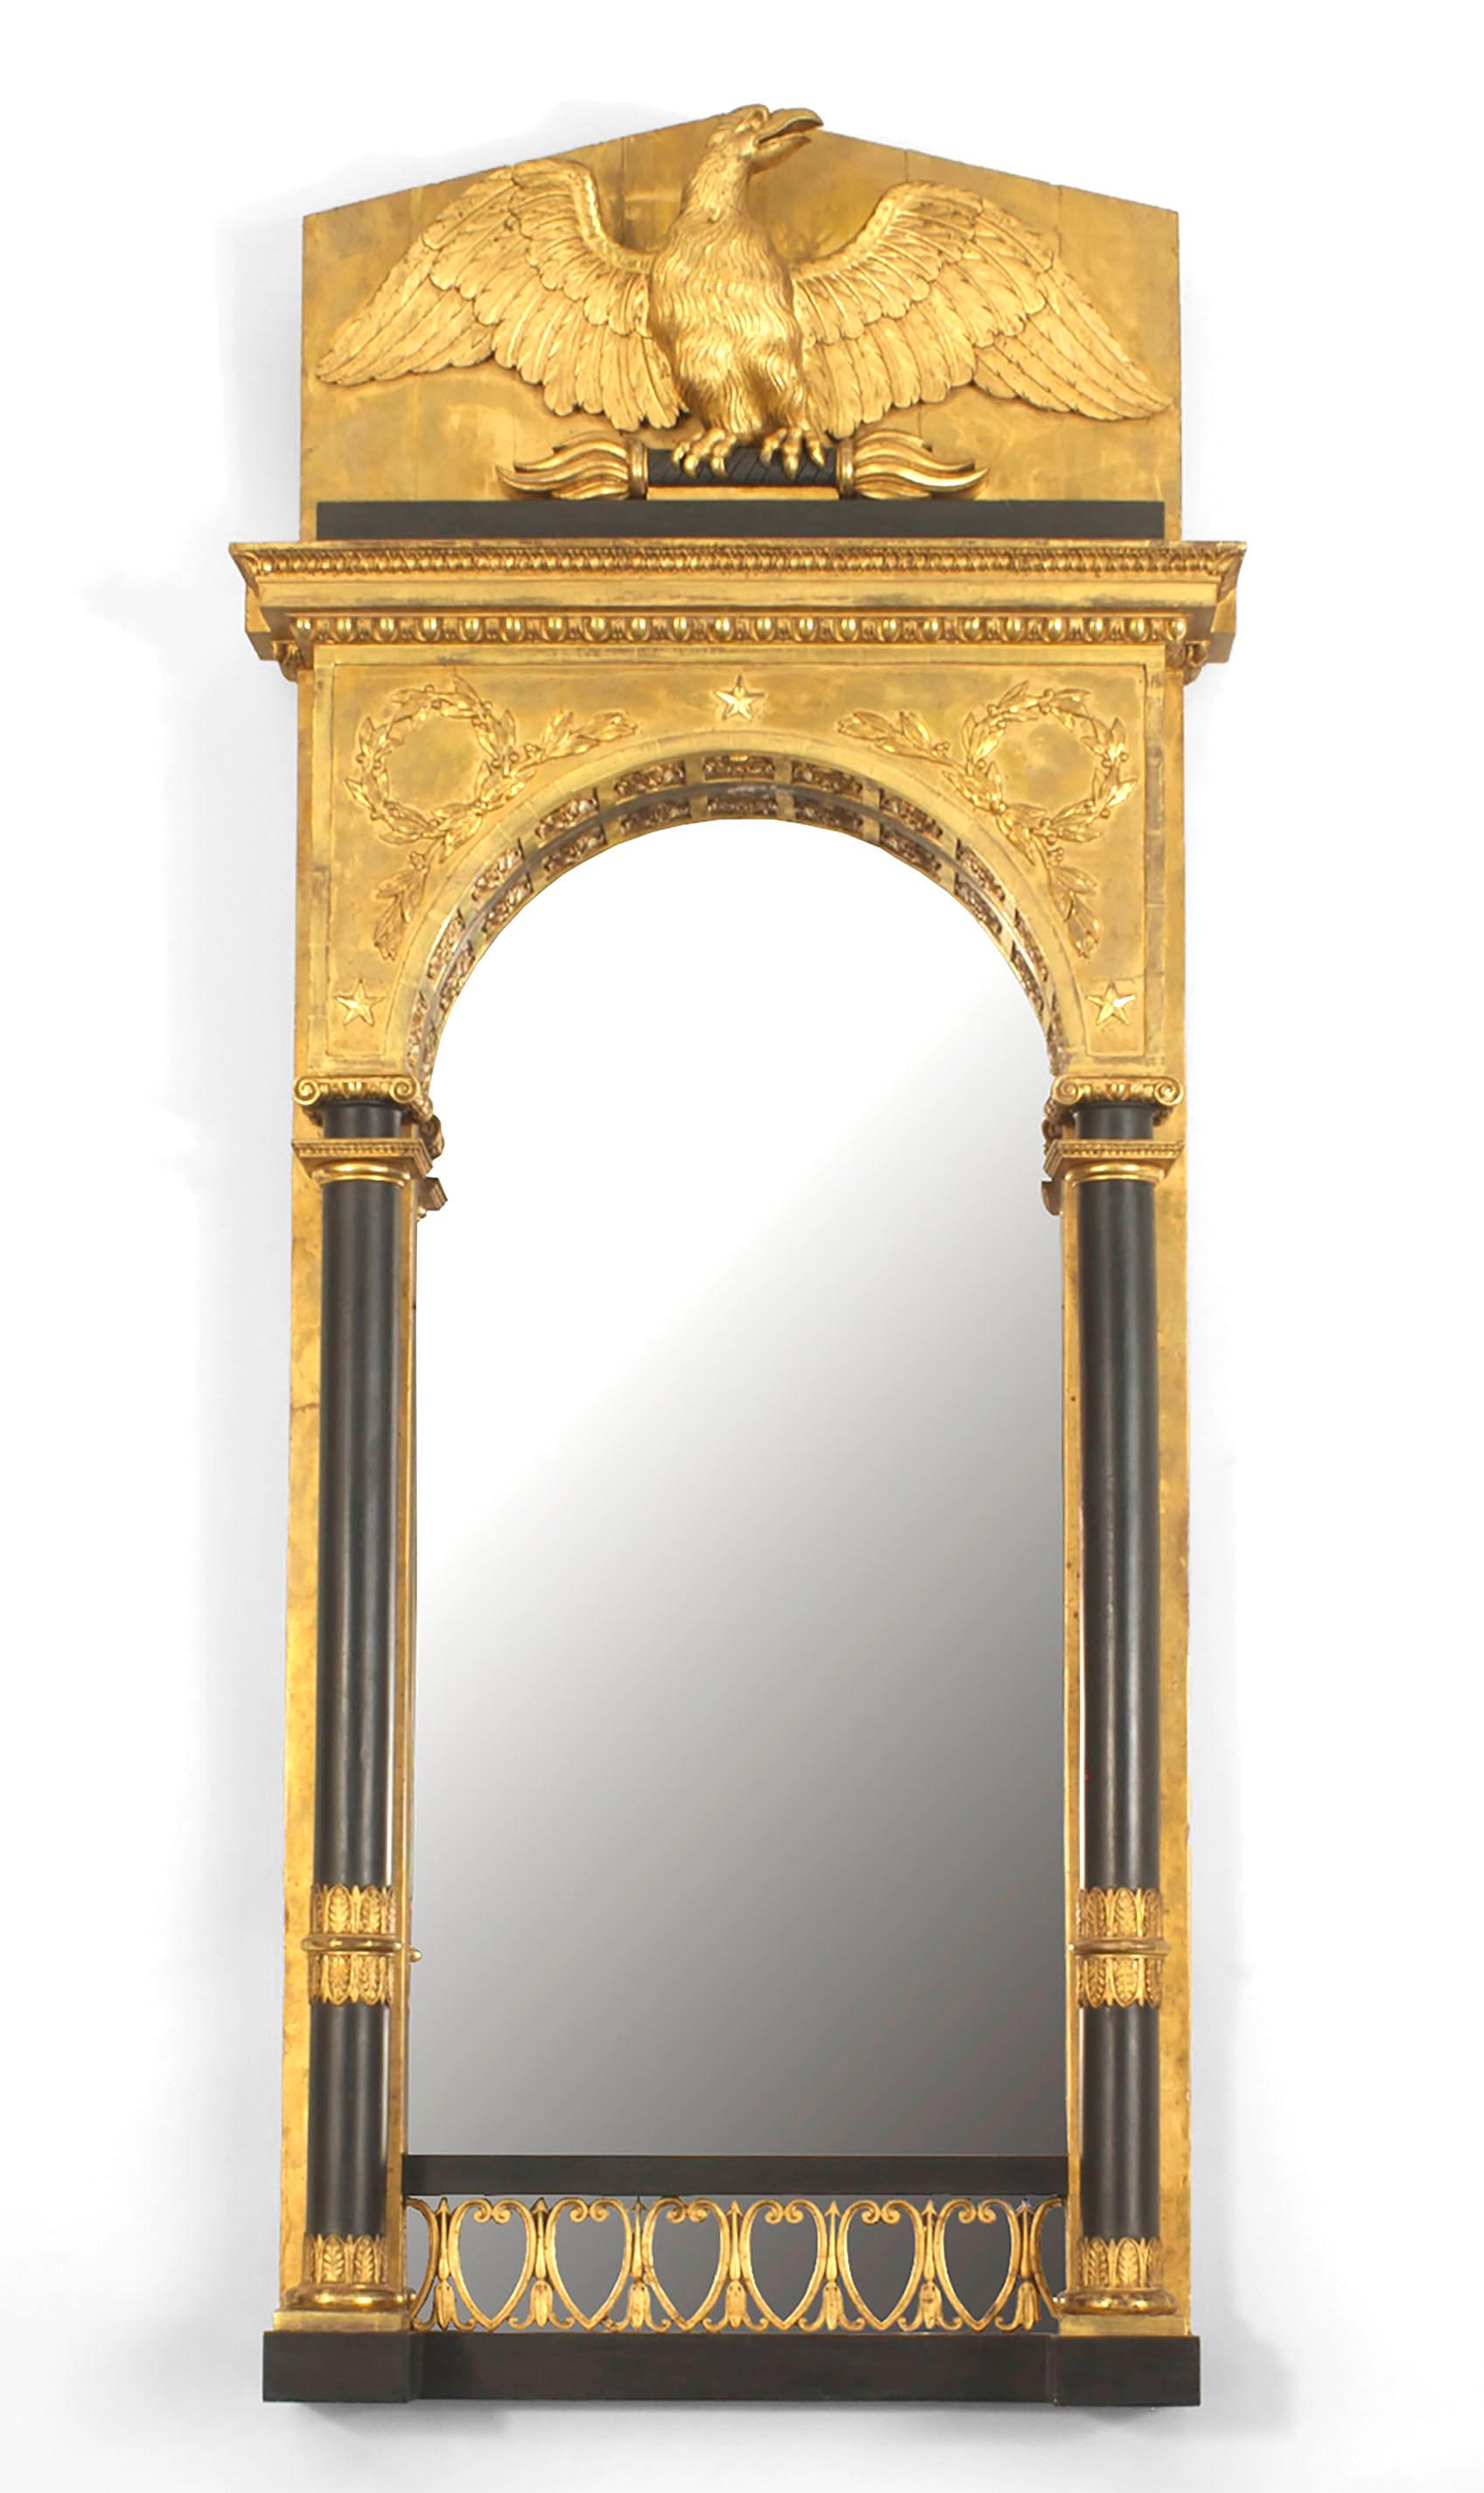 Continental Swedish Empire giltwood wall mirror with ebonized column sides and trim and a carved eagle pediment over an arch form mirror.
 